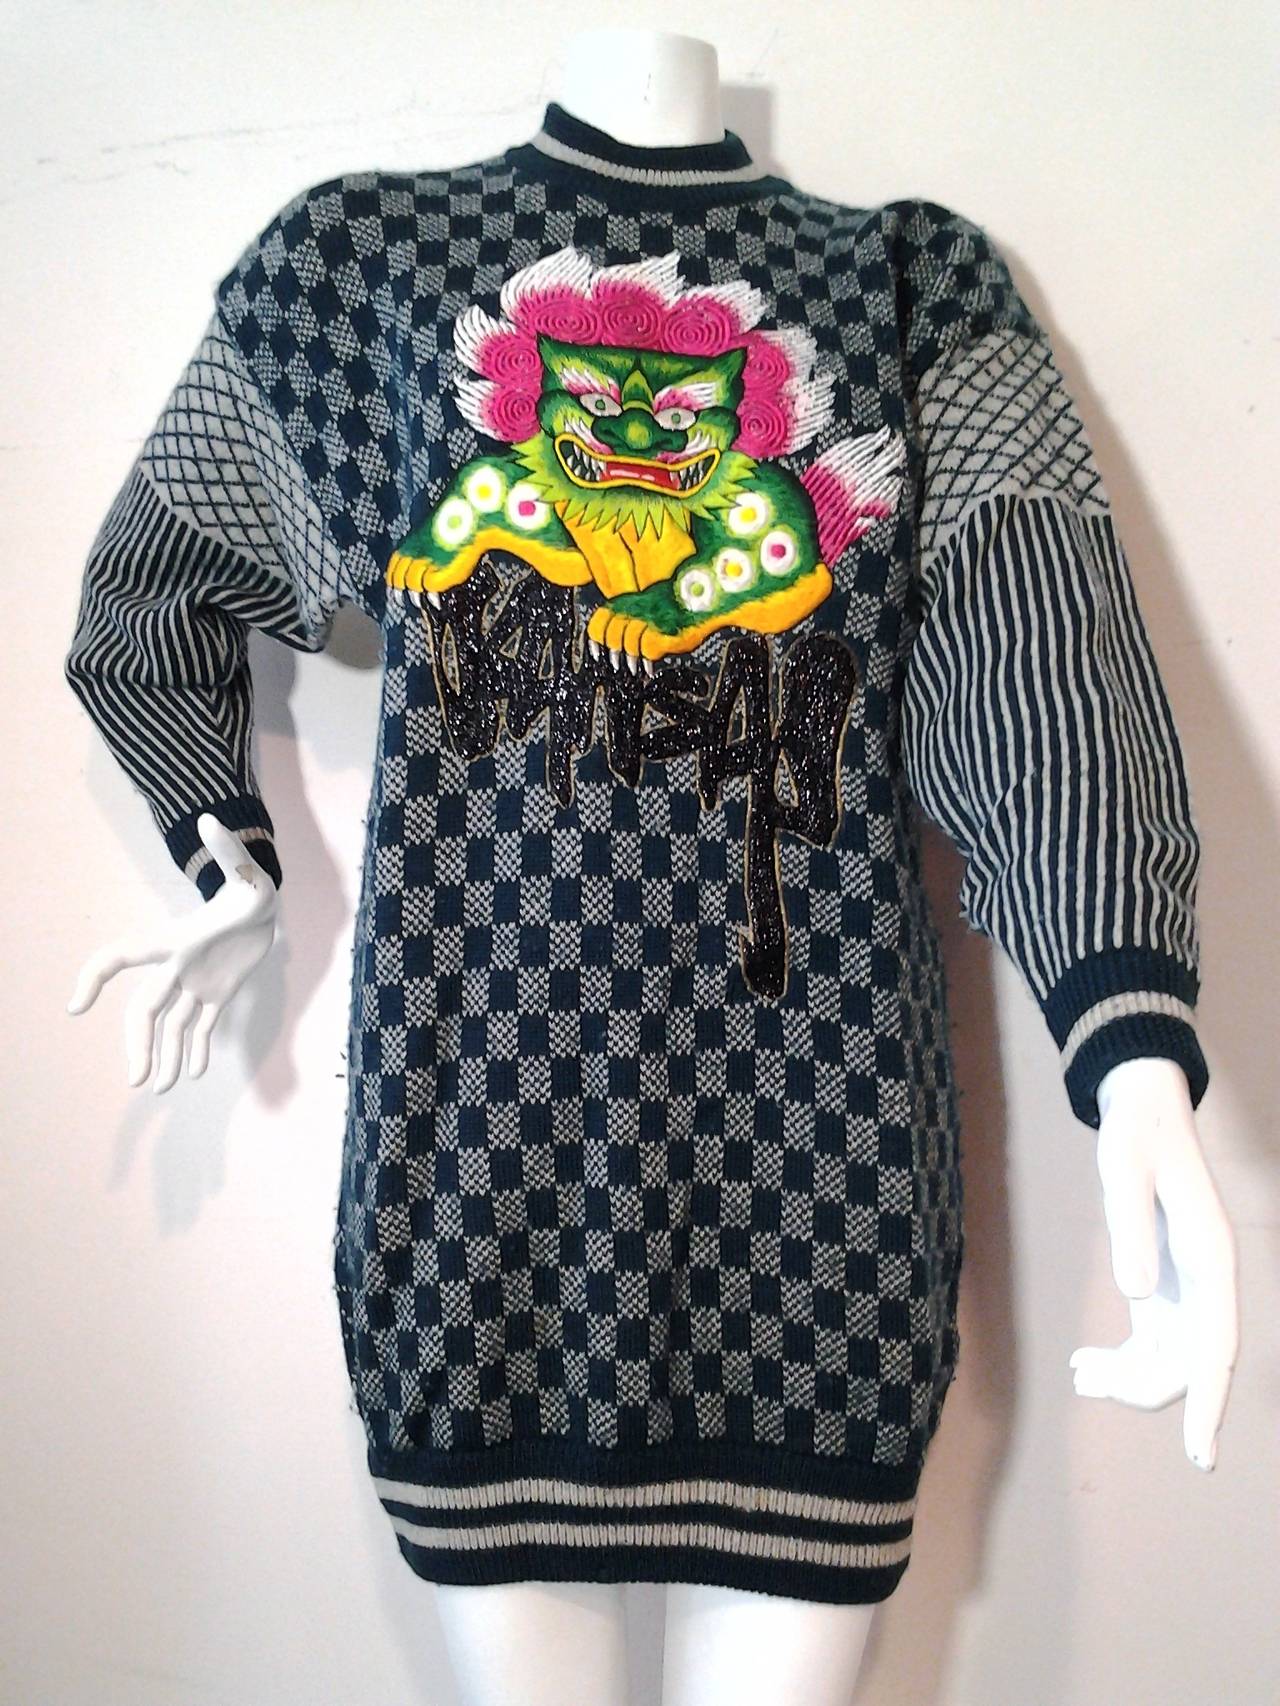 A fun 1980s Kansai Yamamoto multi-patterned sweater with beaded Kansai signature and embroidered dragon motif on front.